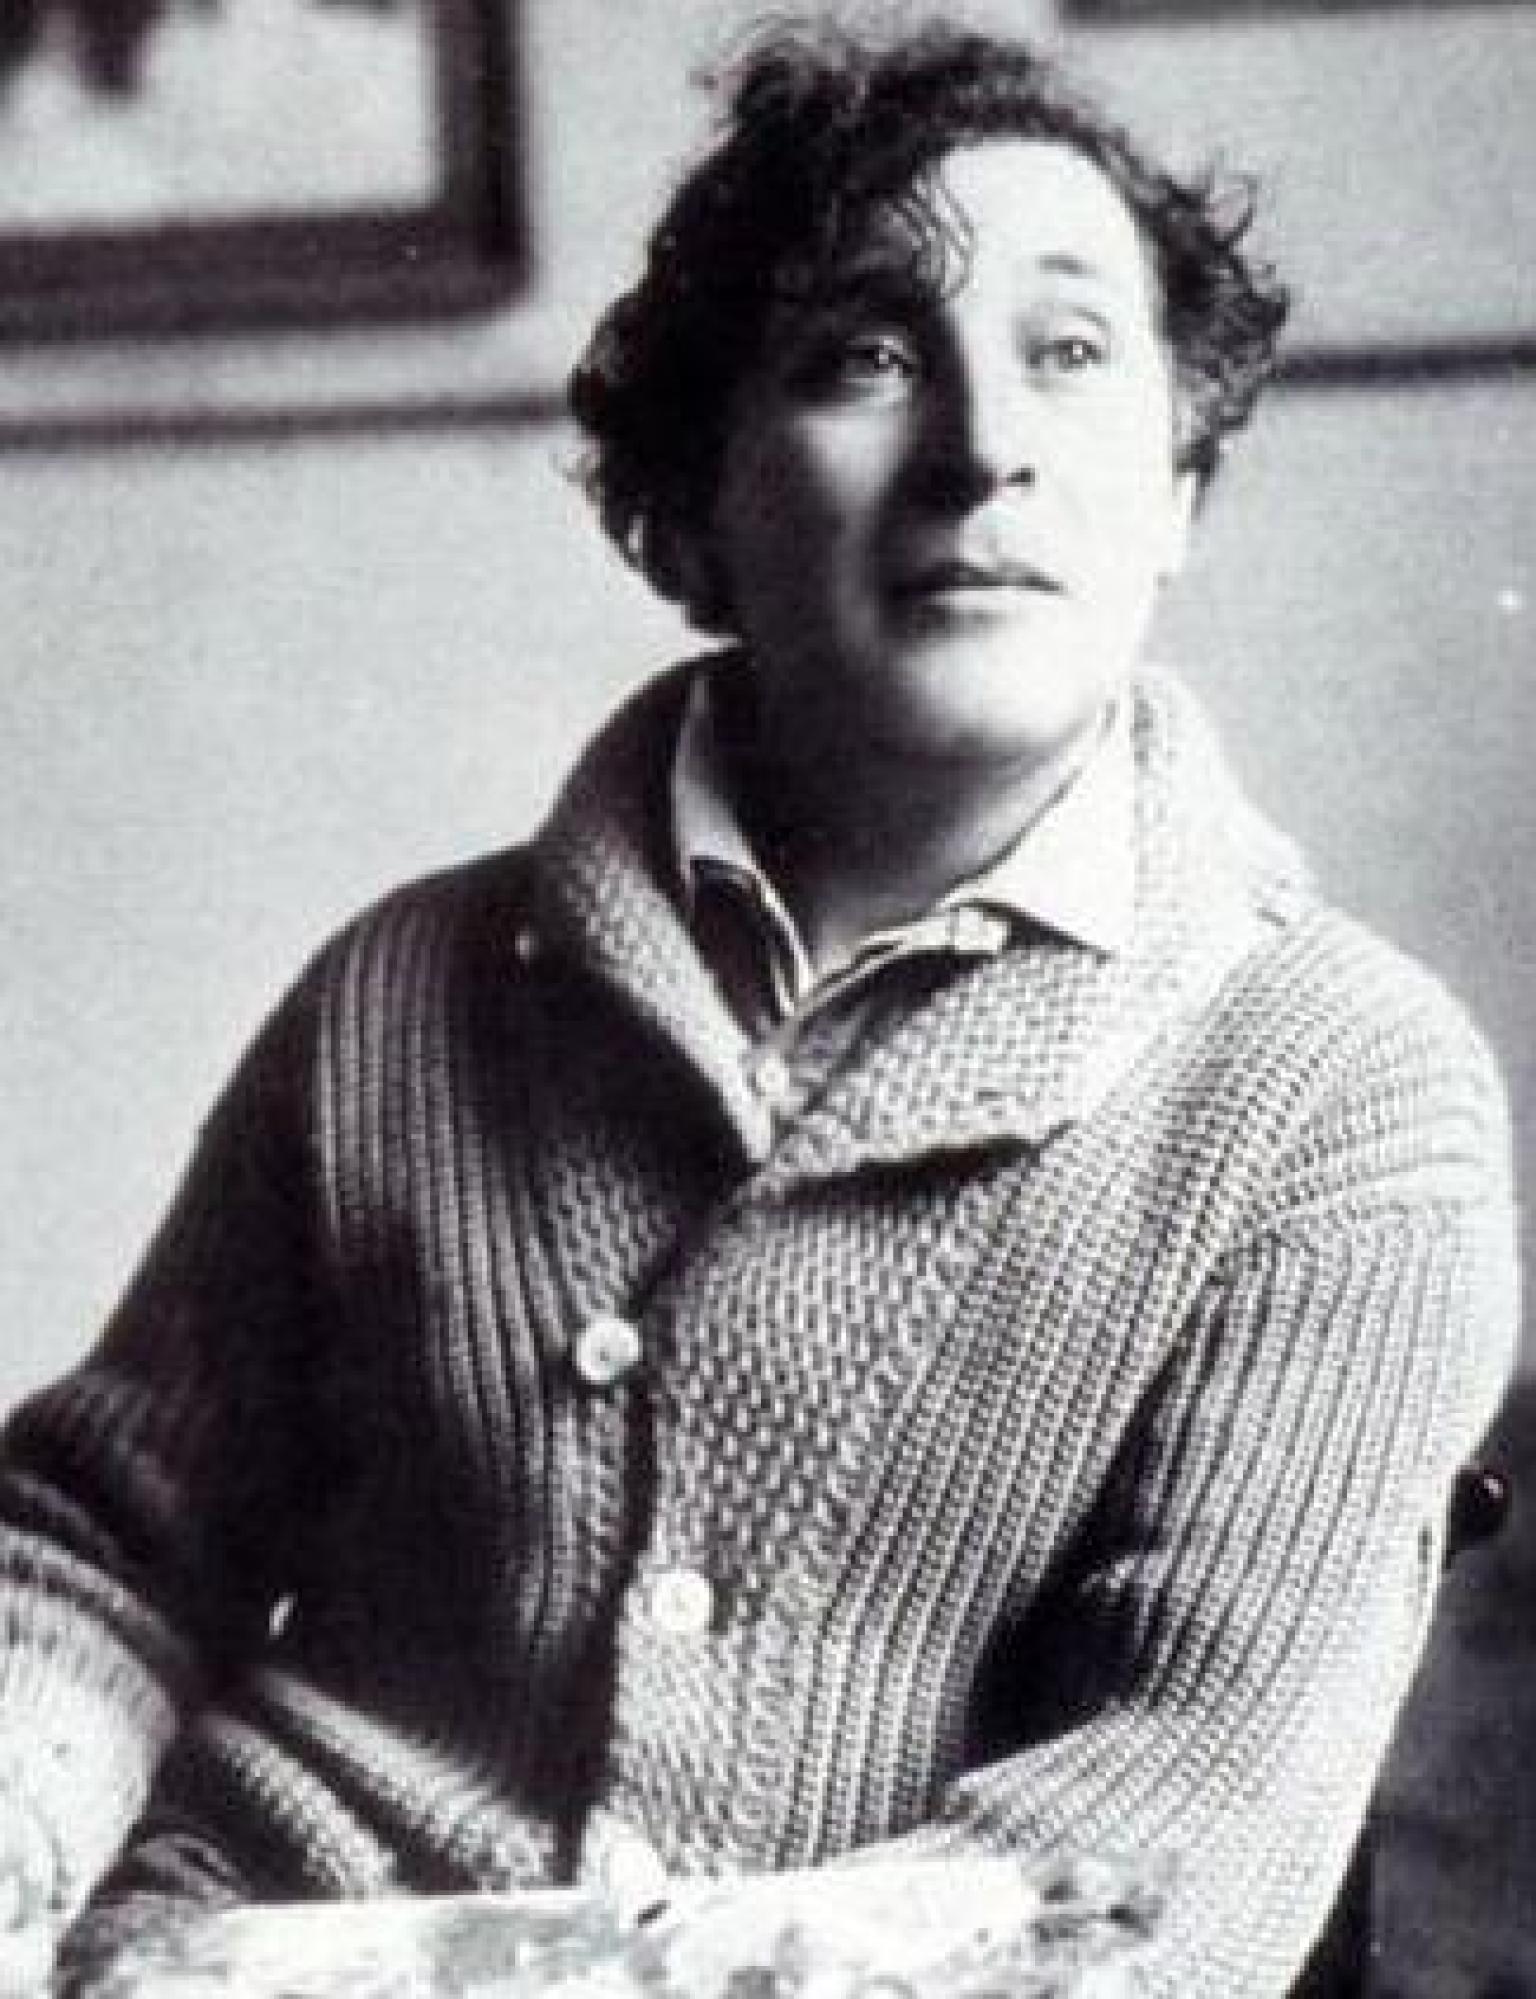 Marc Chagall - July 6, 1887 - March 28, 1985